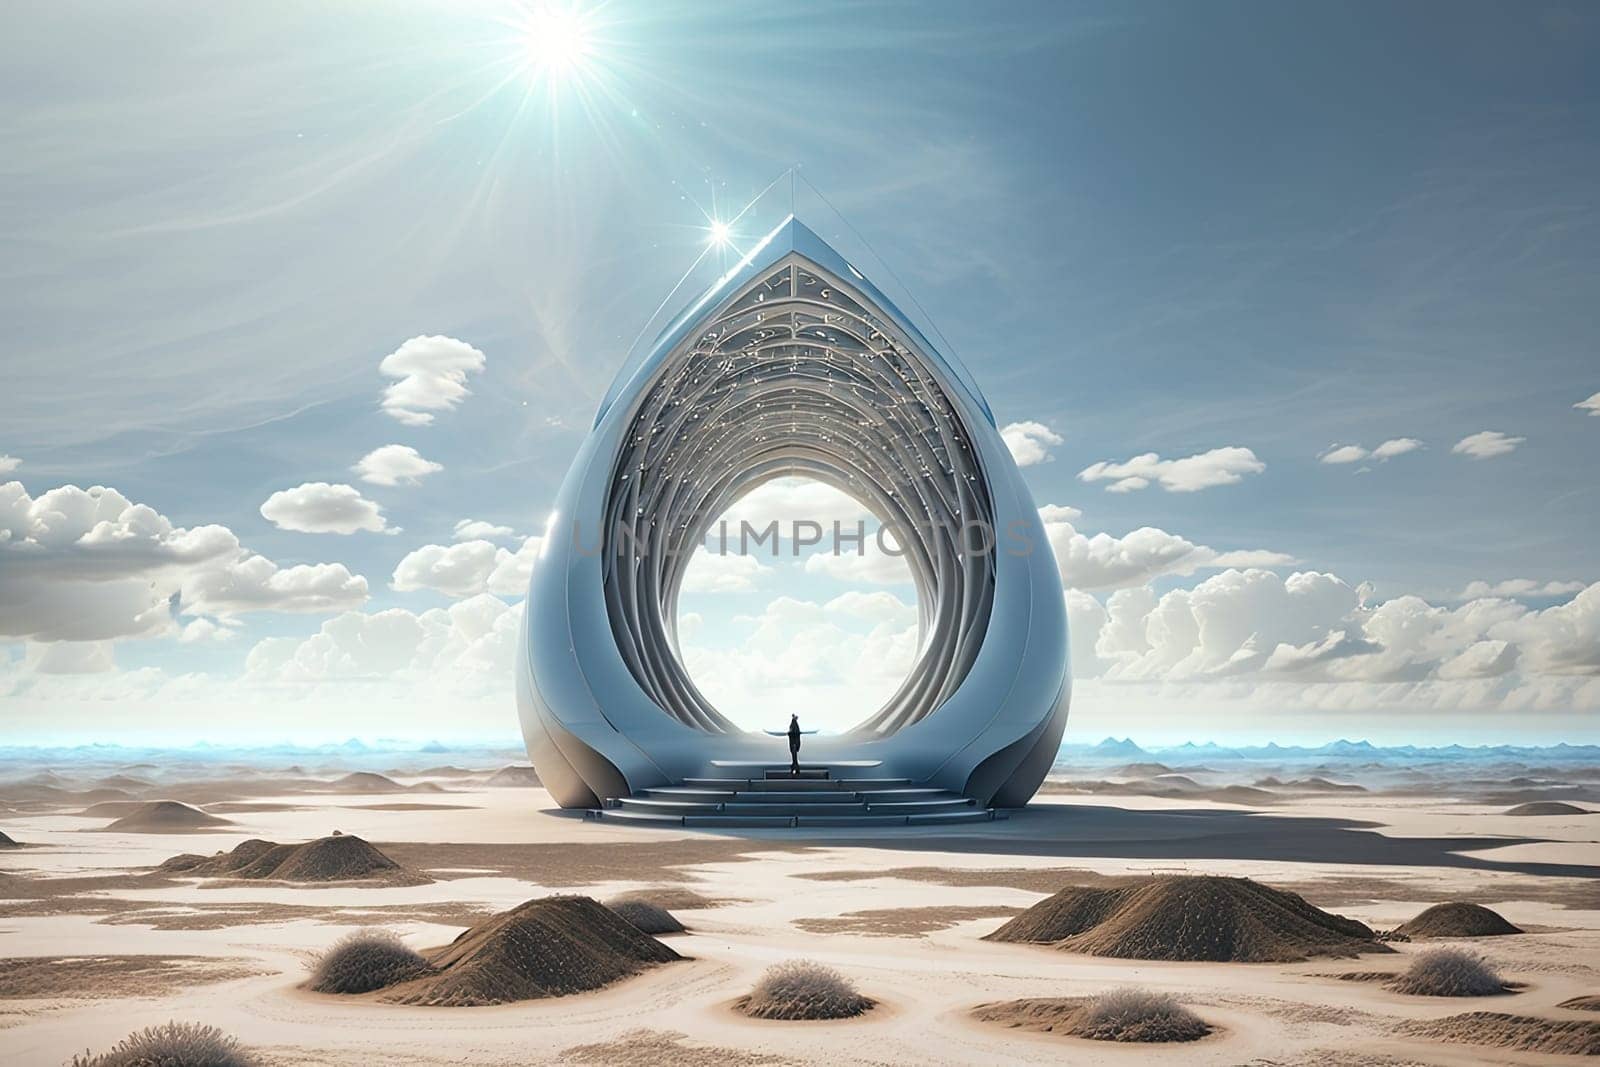 Futuristic building in the desert by applesstock